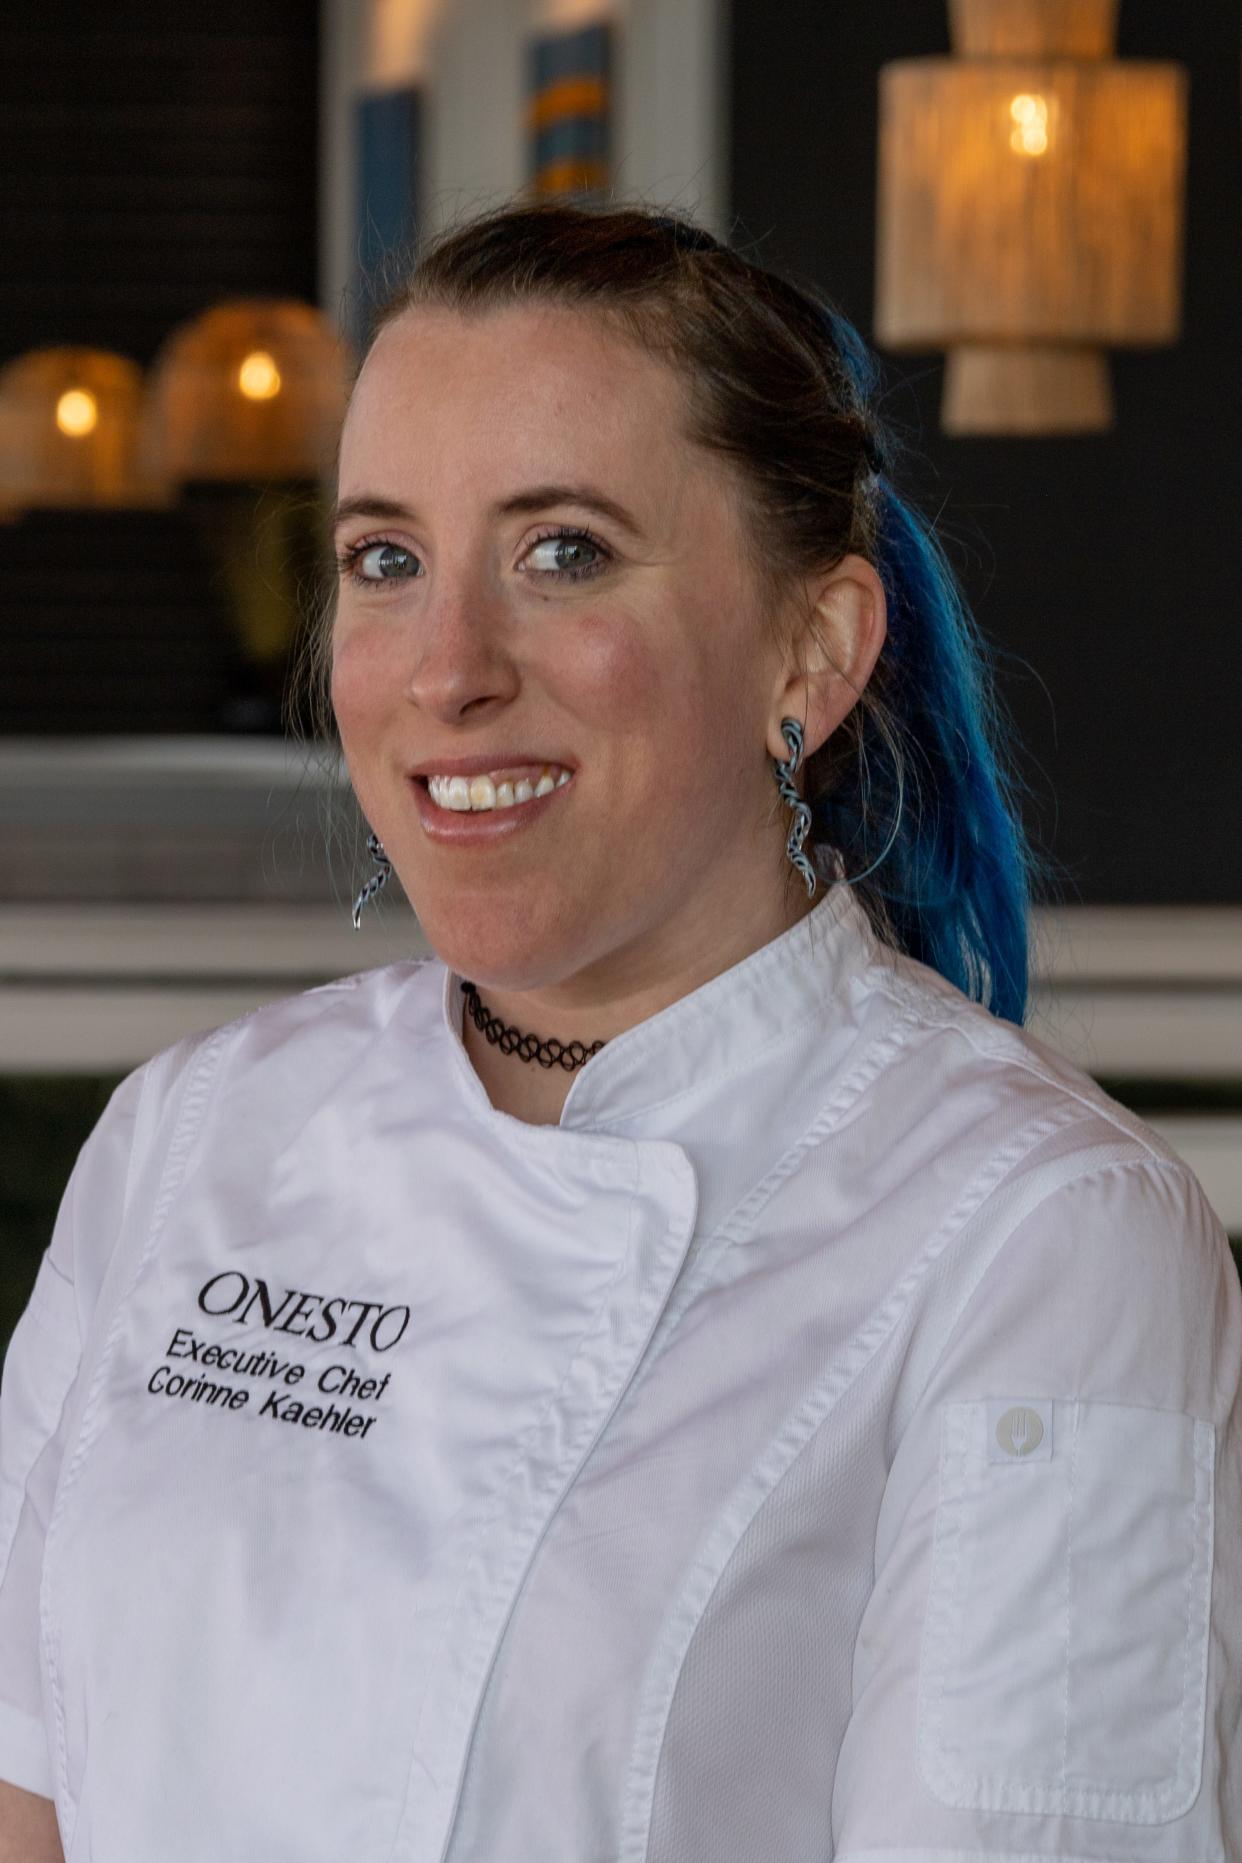 Corinne Kaehler has been the executive chef at Onesto since December 2022. Before that, she worked in several Bartolotta restaurant kitchens and Benson’s Restaurant Group's Blue Bat Kitchen & Tequilaria.